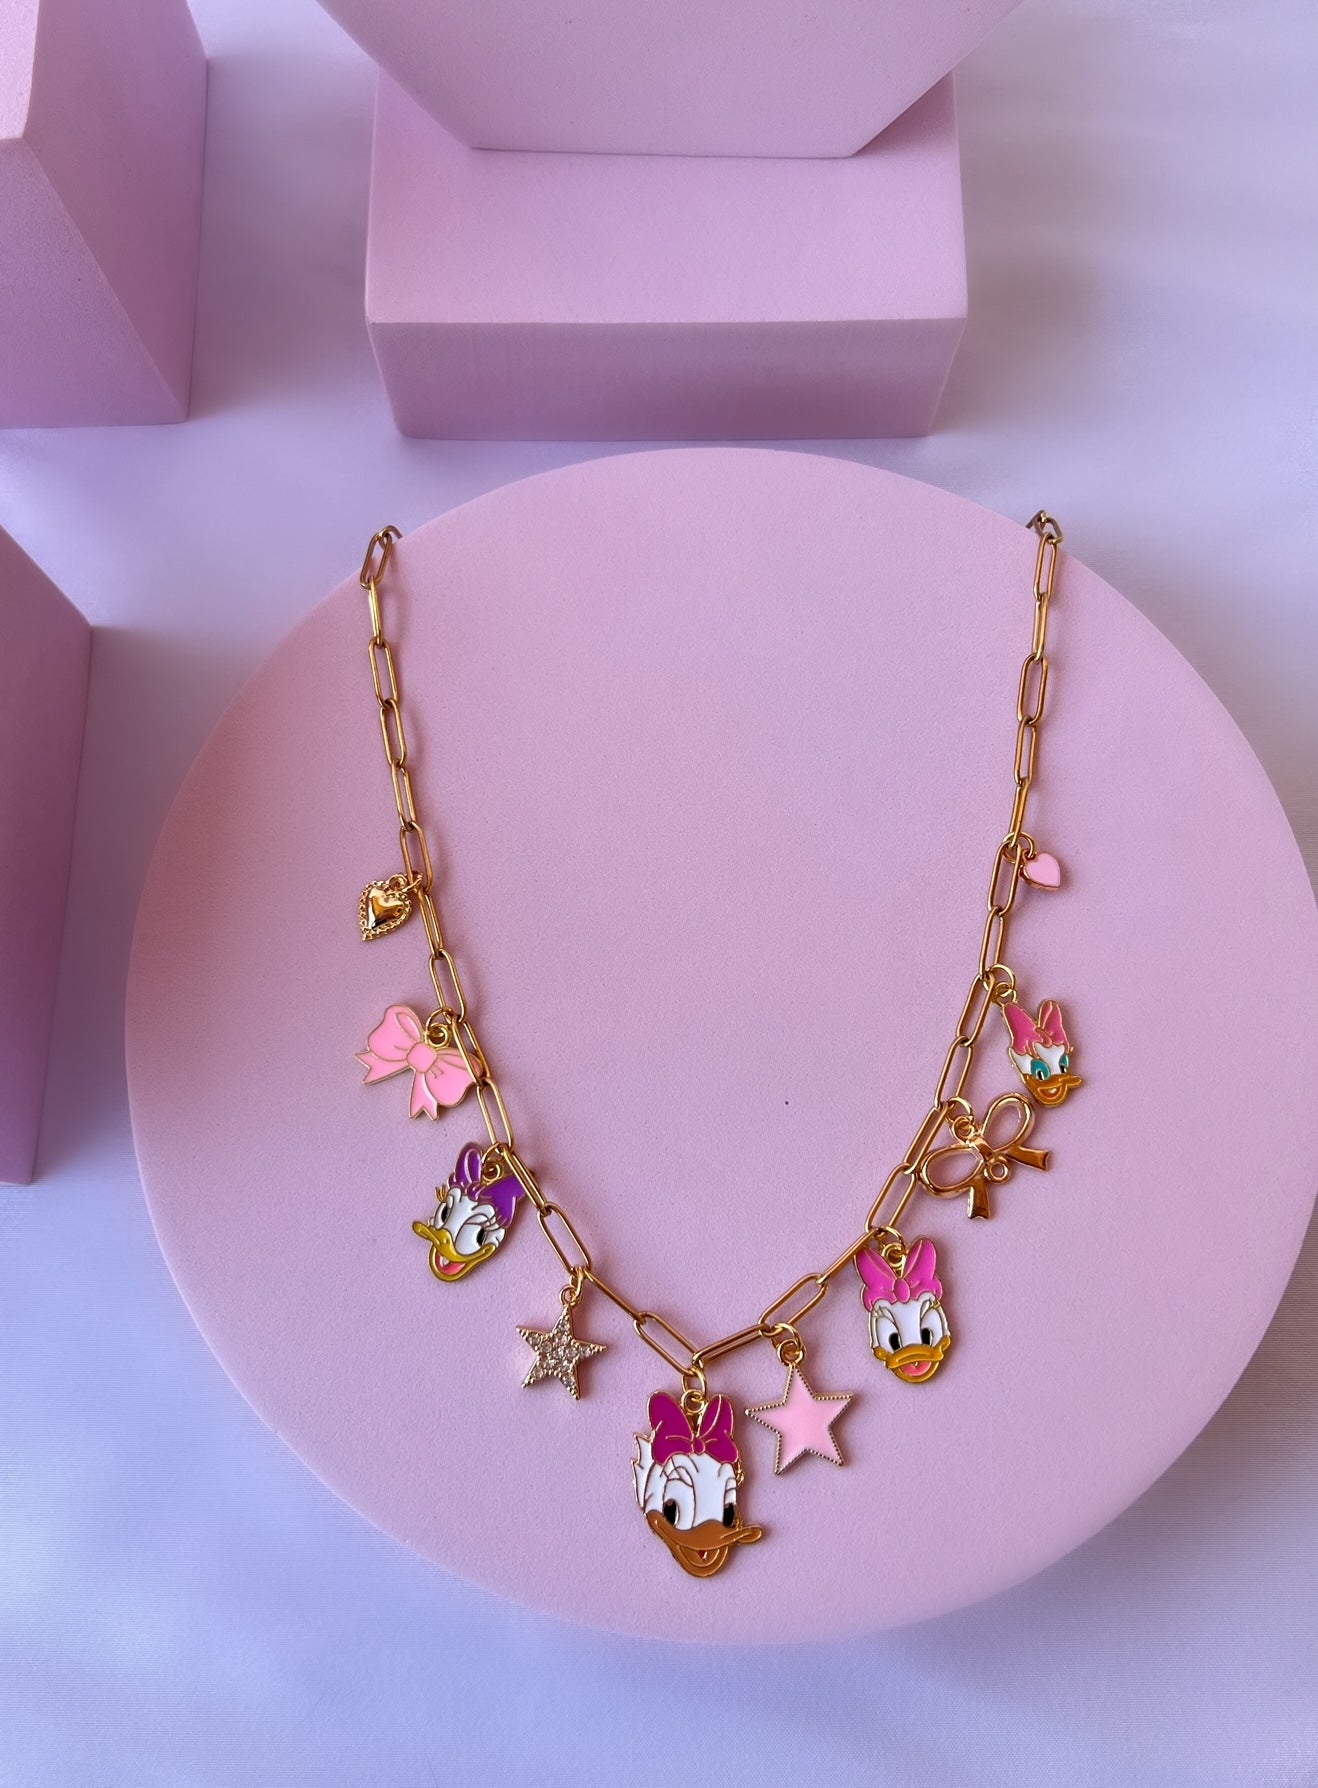 Girly Duck Charm Necklace